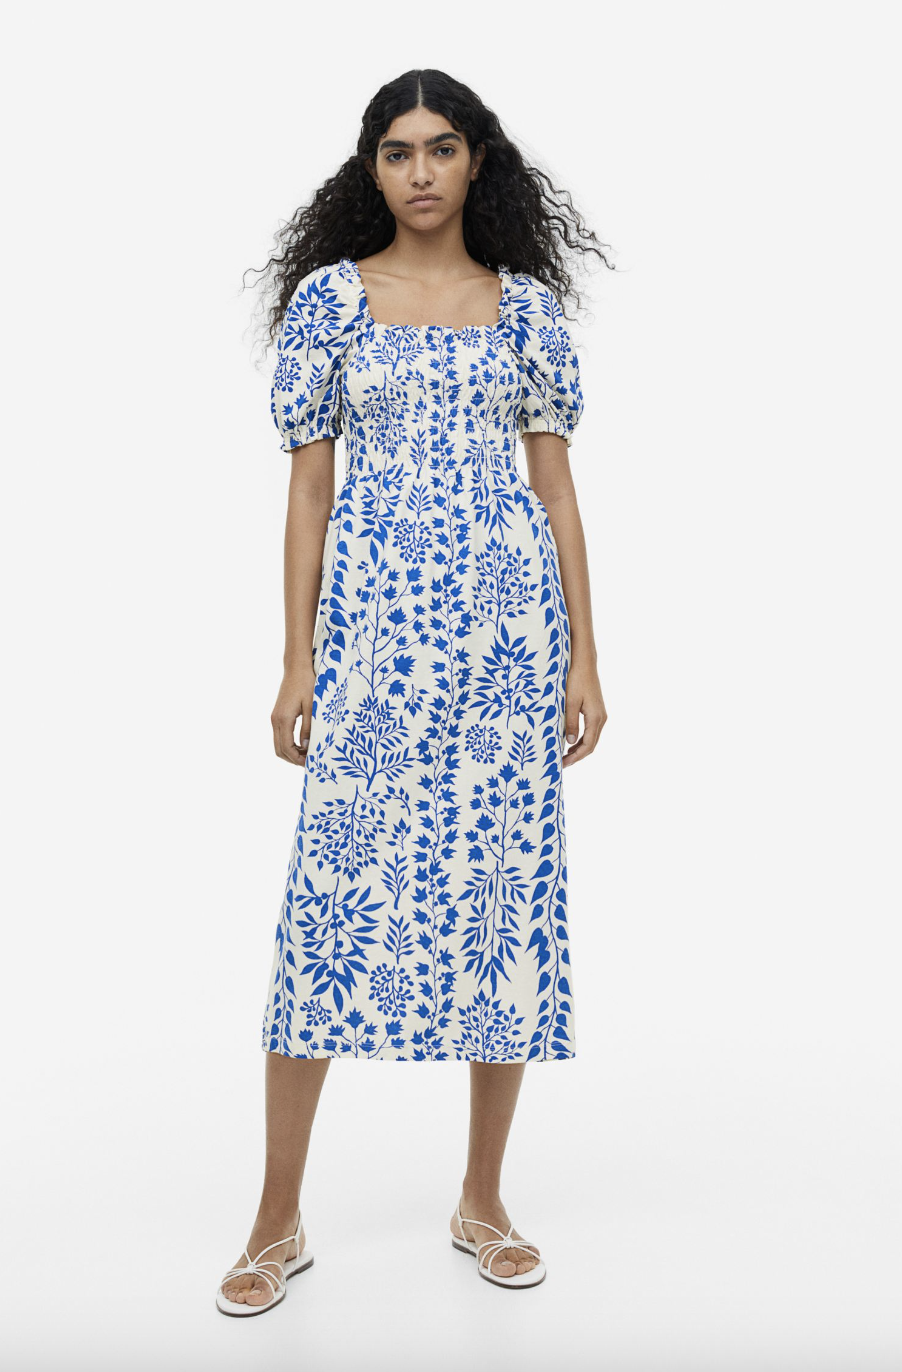 model with long black curly hair wearing floral blue and white printed Smocked Jersey Dress (photo via H&M)